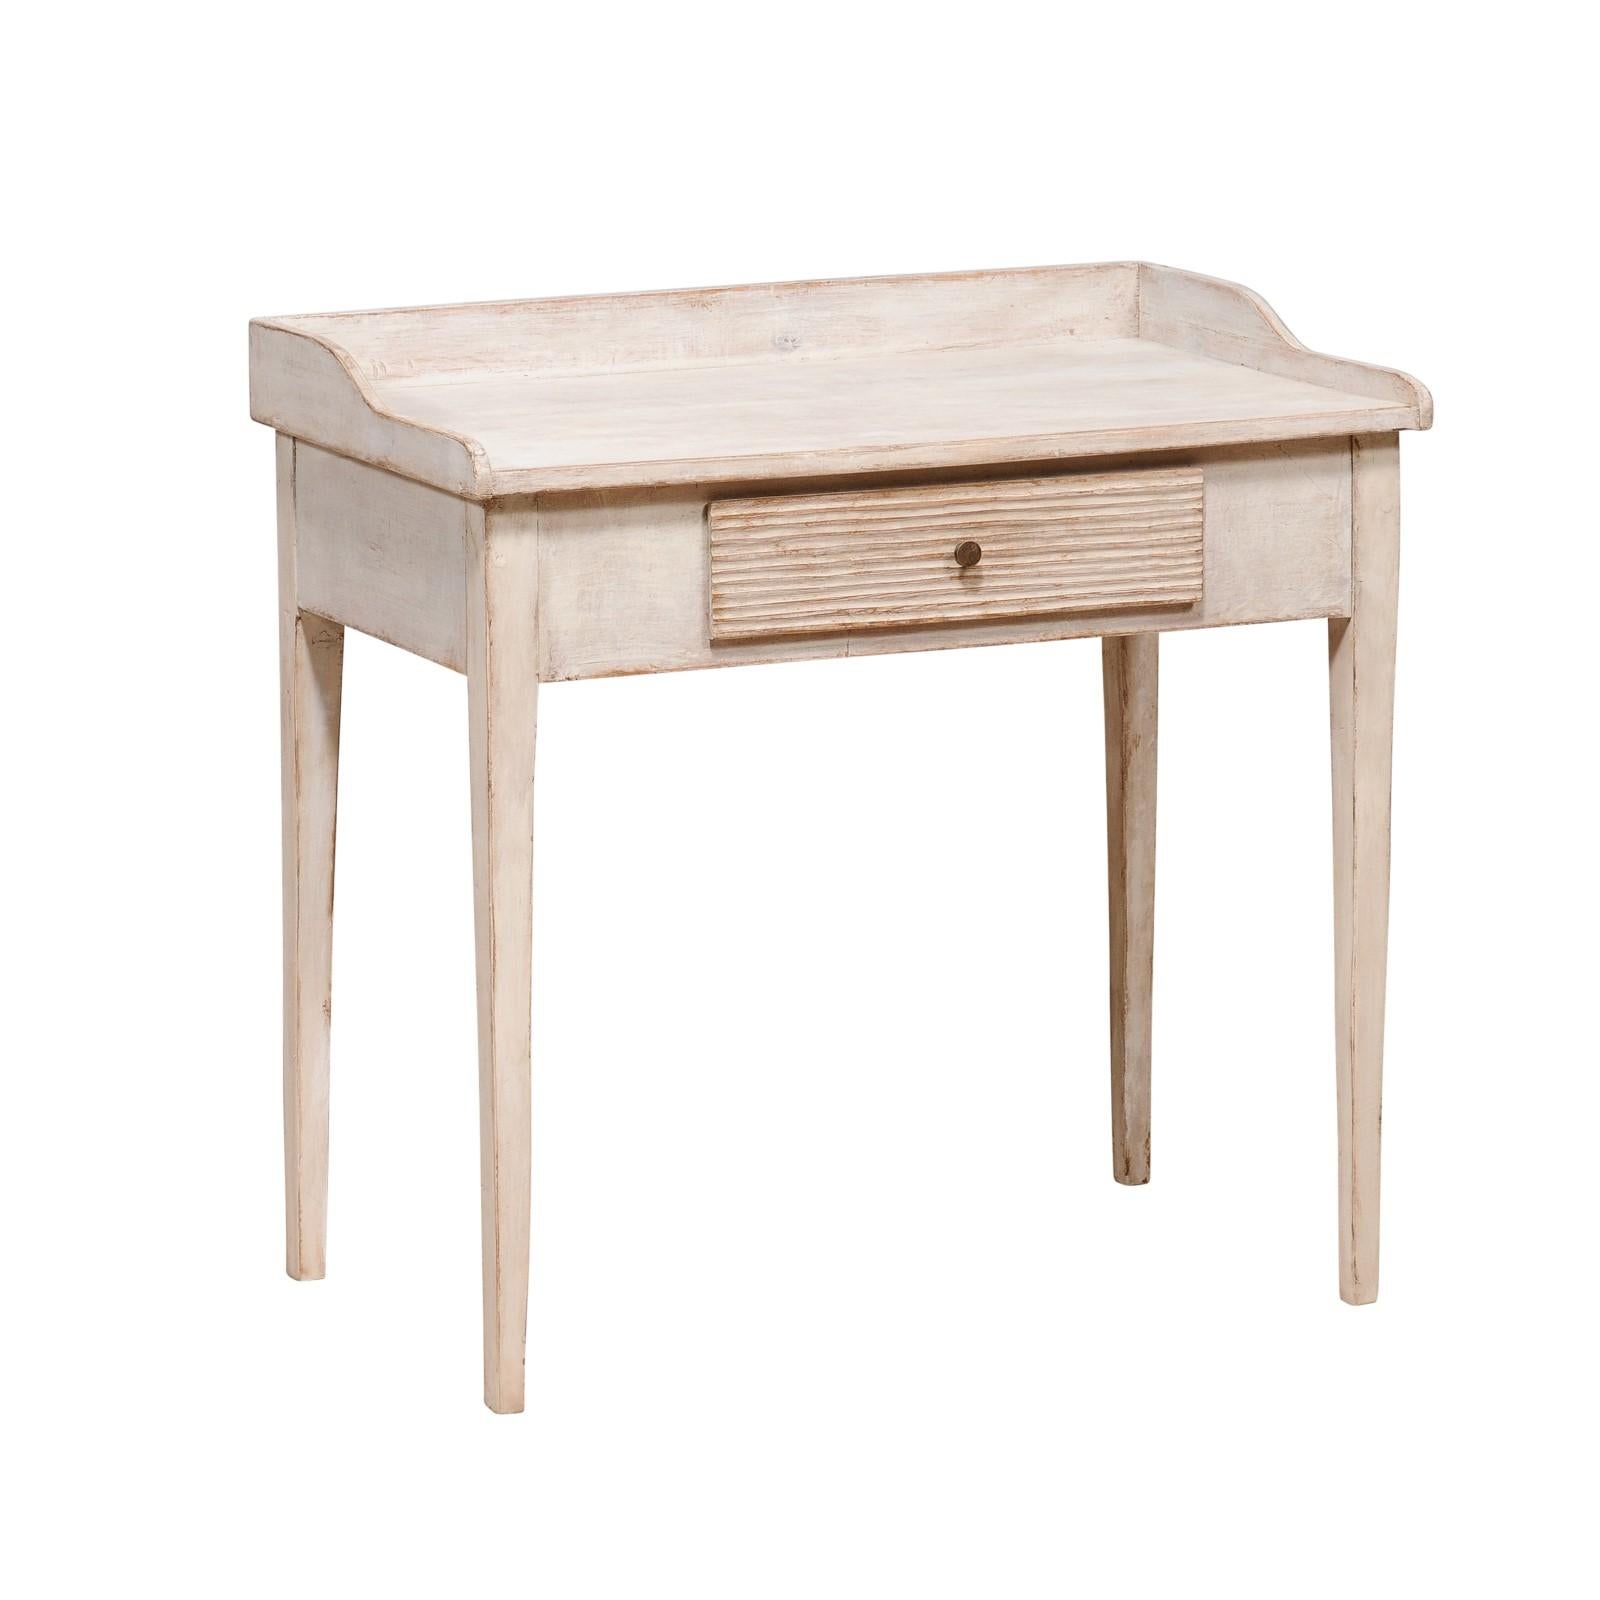 A Swedish off-white, light grey painted writing desk from the 19th century with three-quarter gallery surrounding the rectangular top, single drawer carved with reeded motifs and four tapered legs. Dive into the timeless charm of Scandinavian